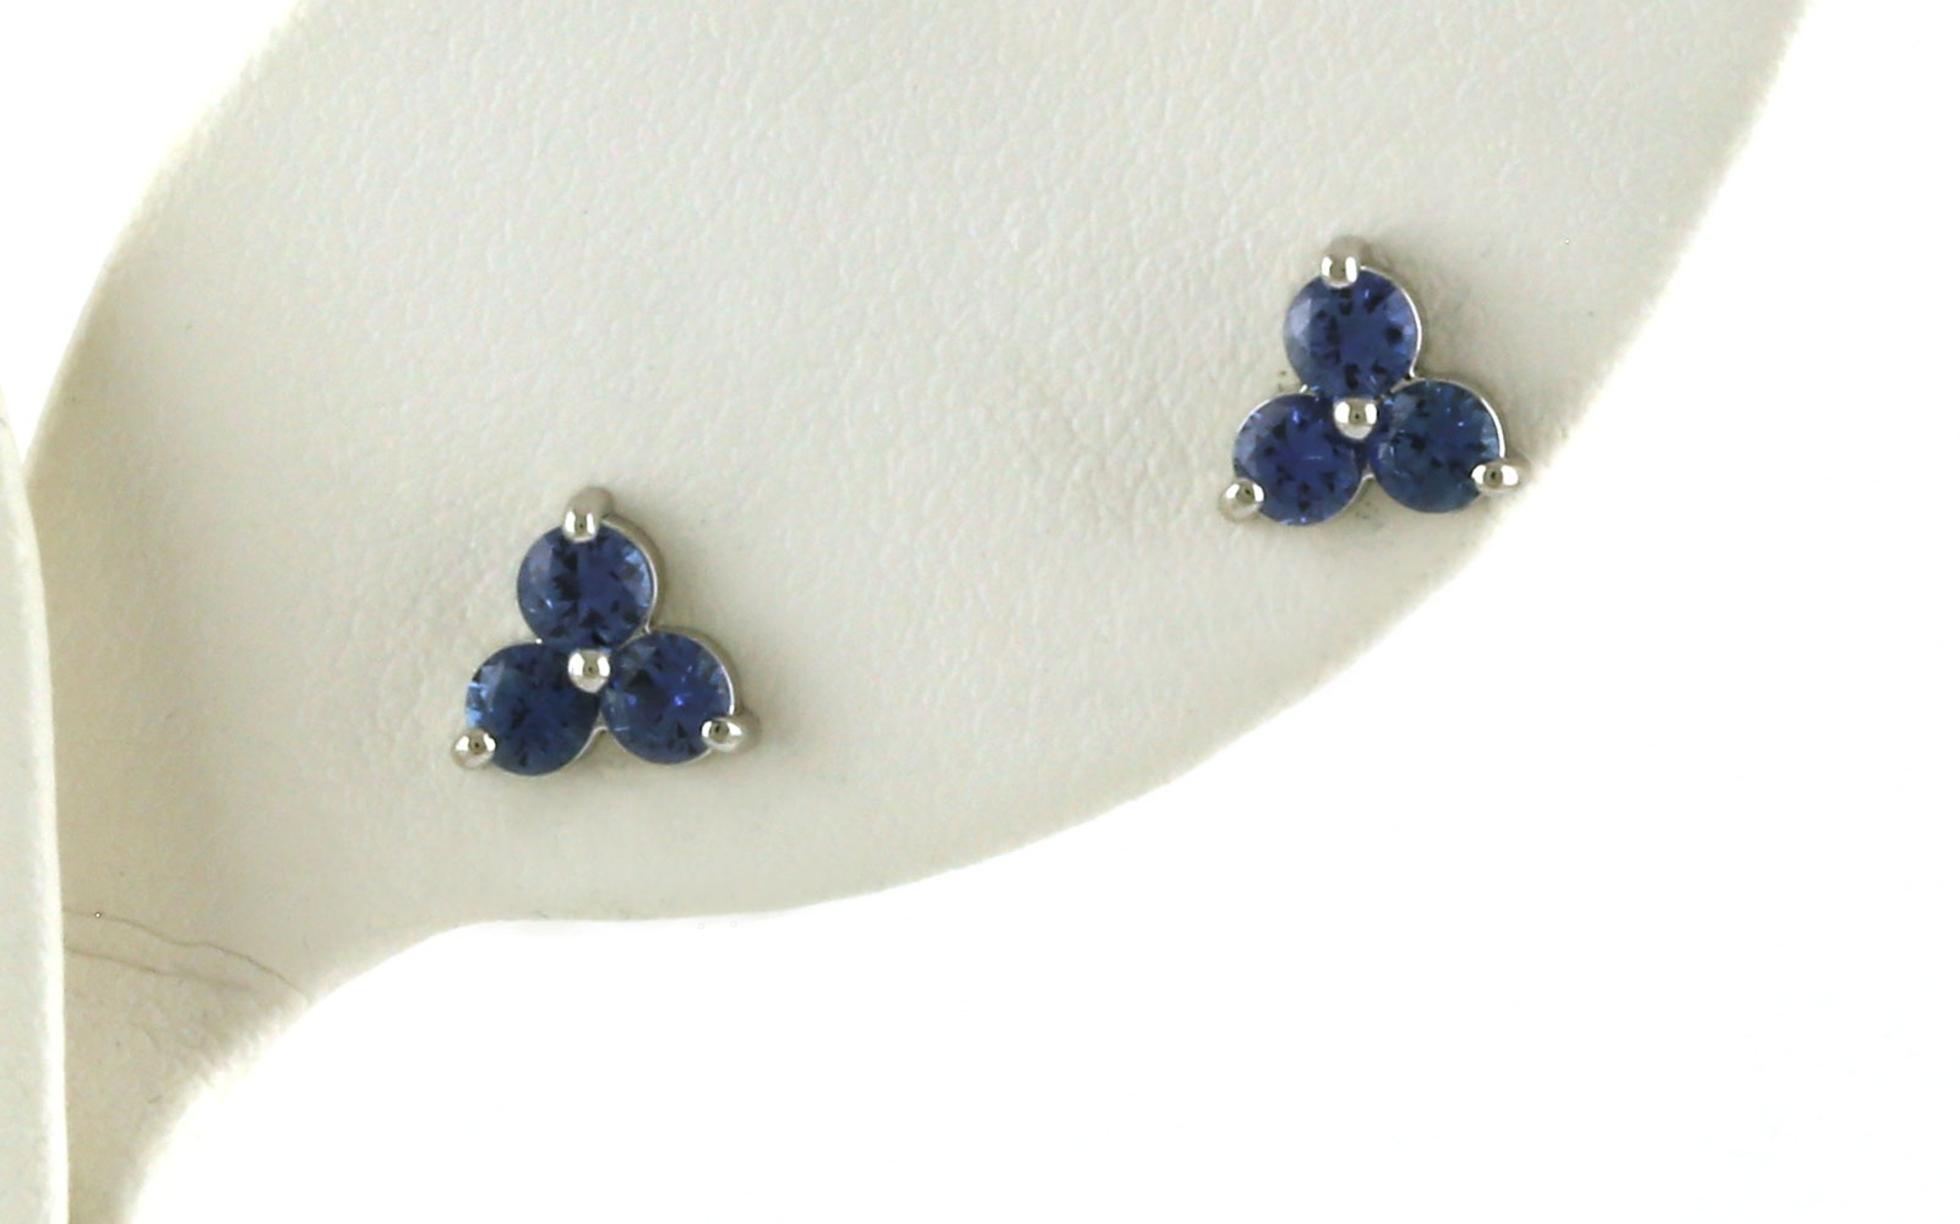 3-Stone Cluster Montana Yogo Sapphire Stud Earrings in White Gold (0.77cts TWT)